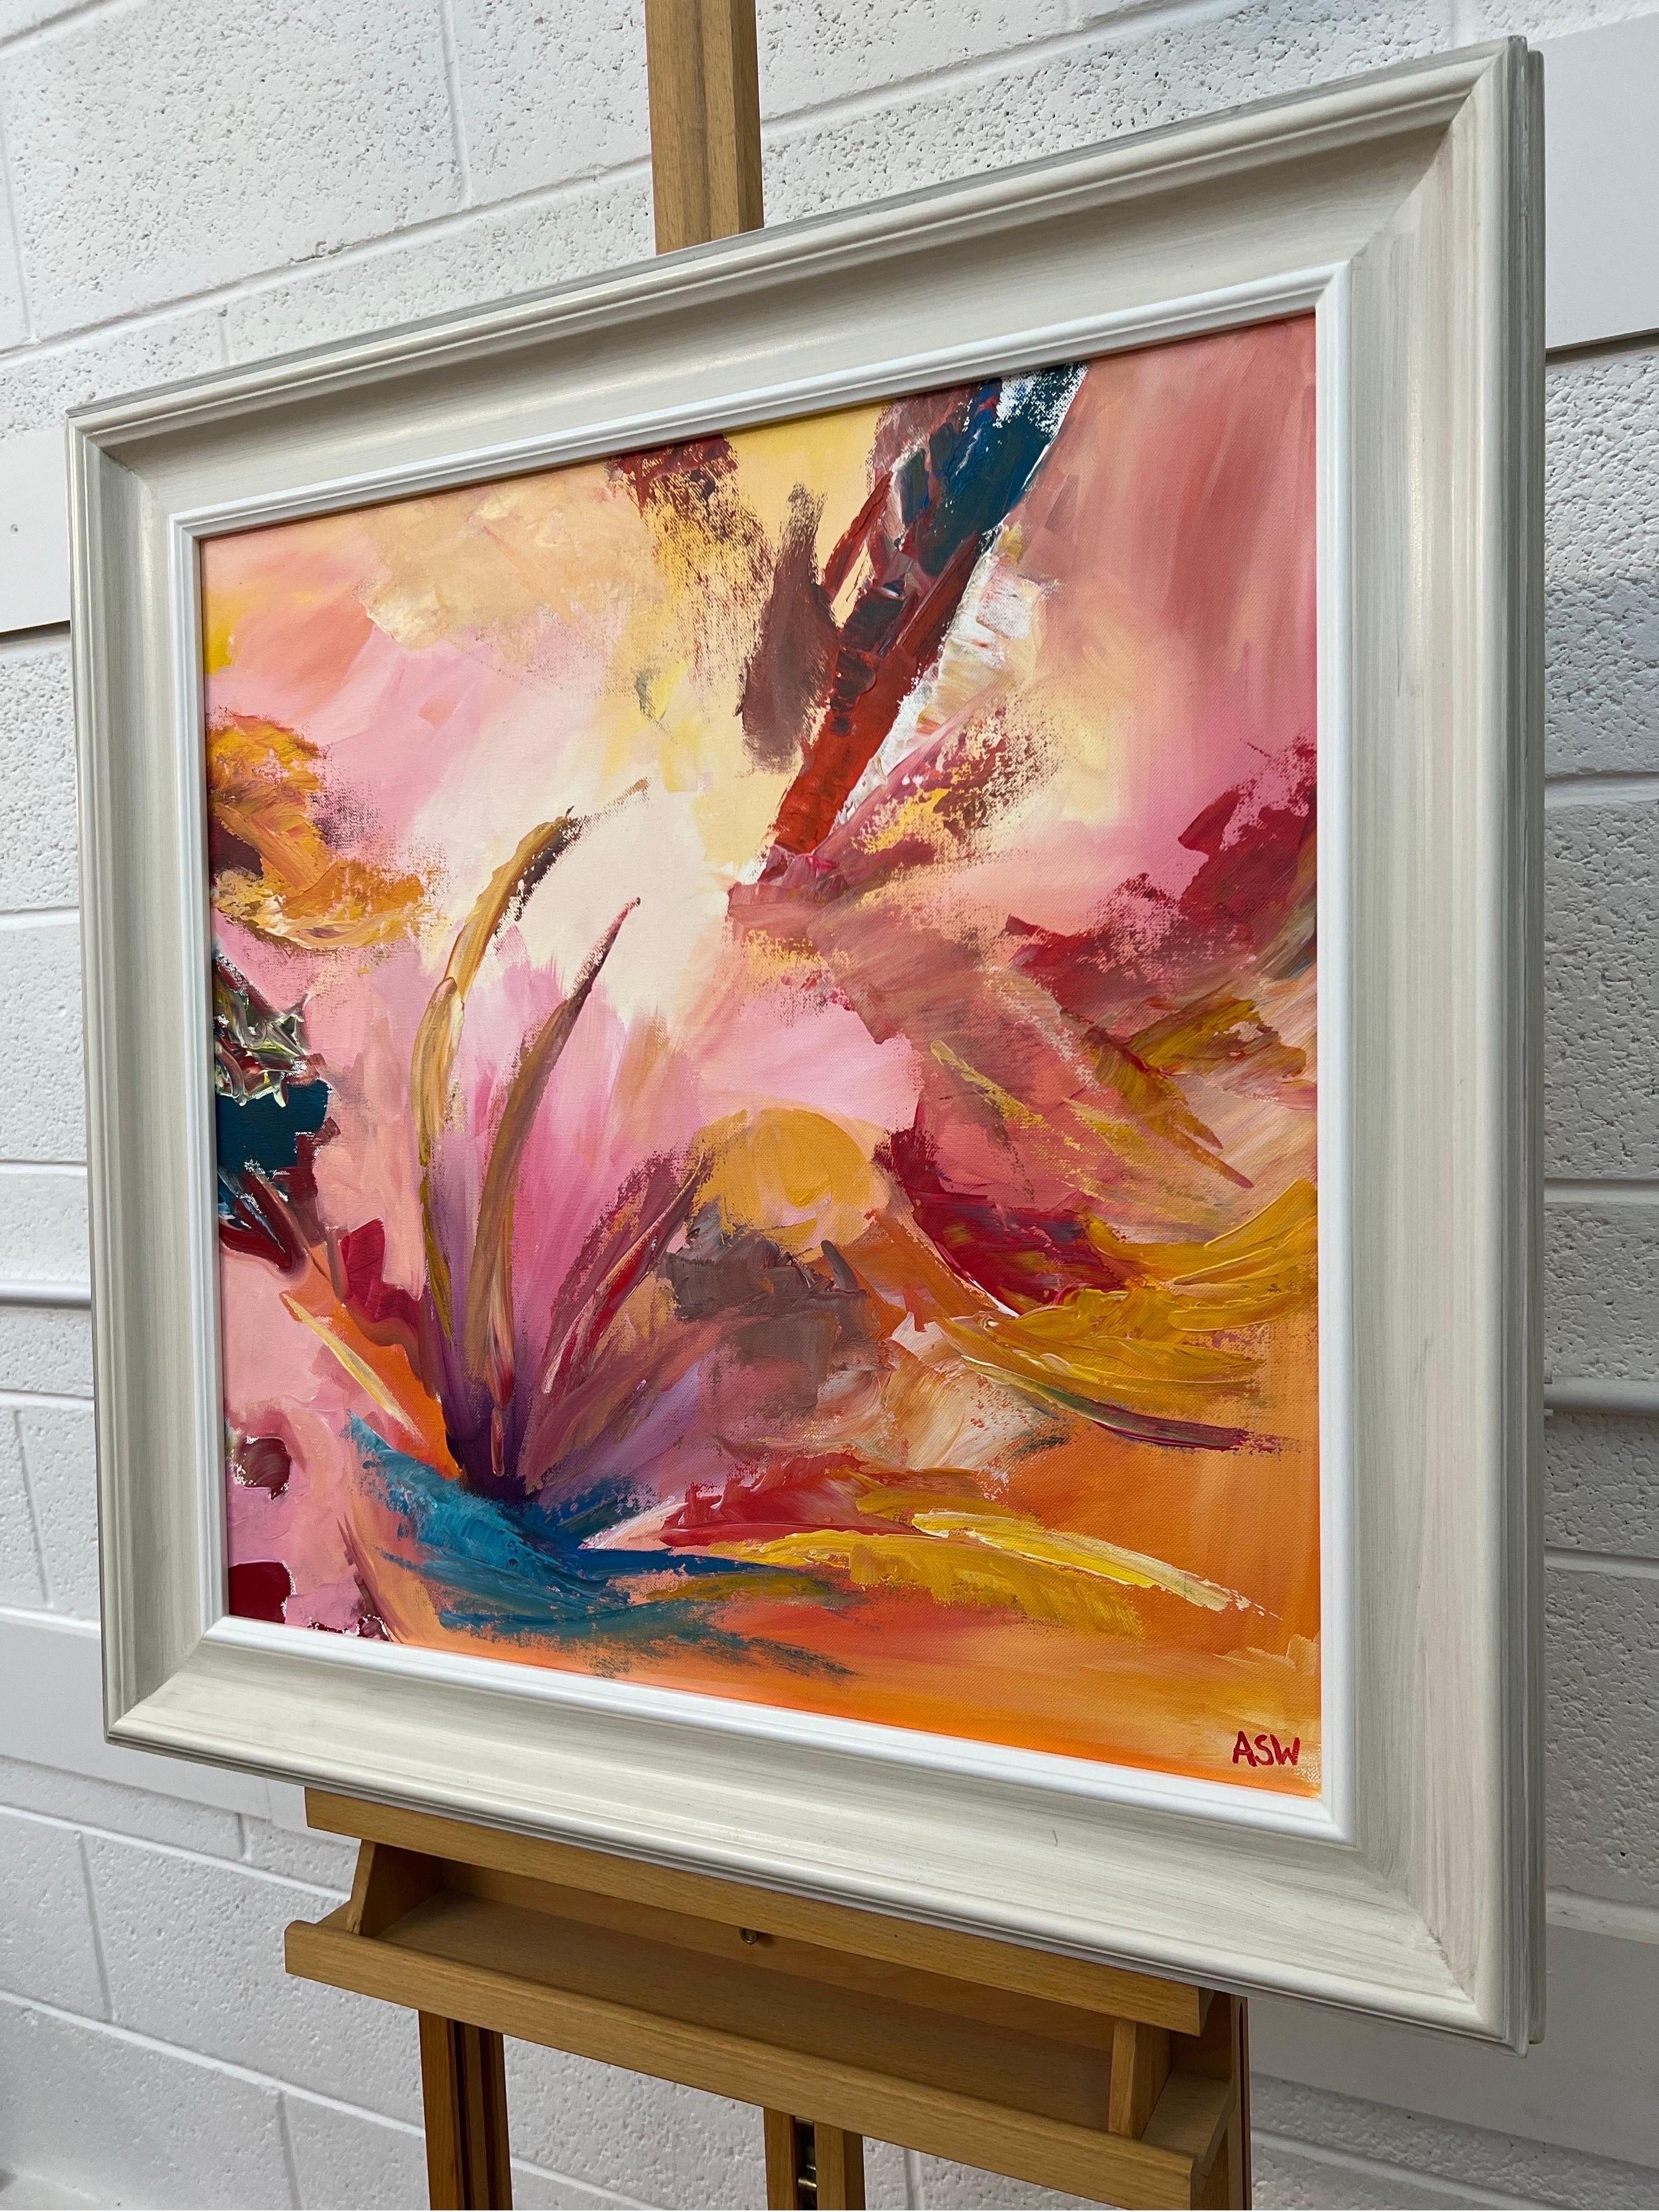 Pink Orange Red & Turquoise Expressive Abstract Canvas by Contemporary British Artist. 

Art measures 24 x 24 inches
Frame measures 29 x 29 inches

Angela Wakefield has twice been on the front cover of ‘Art of England’ and featured in ARTnews,